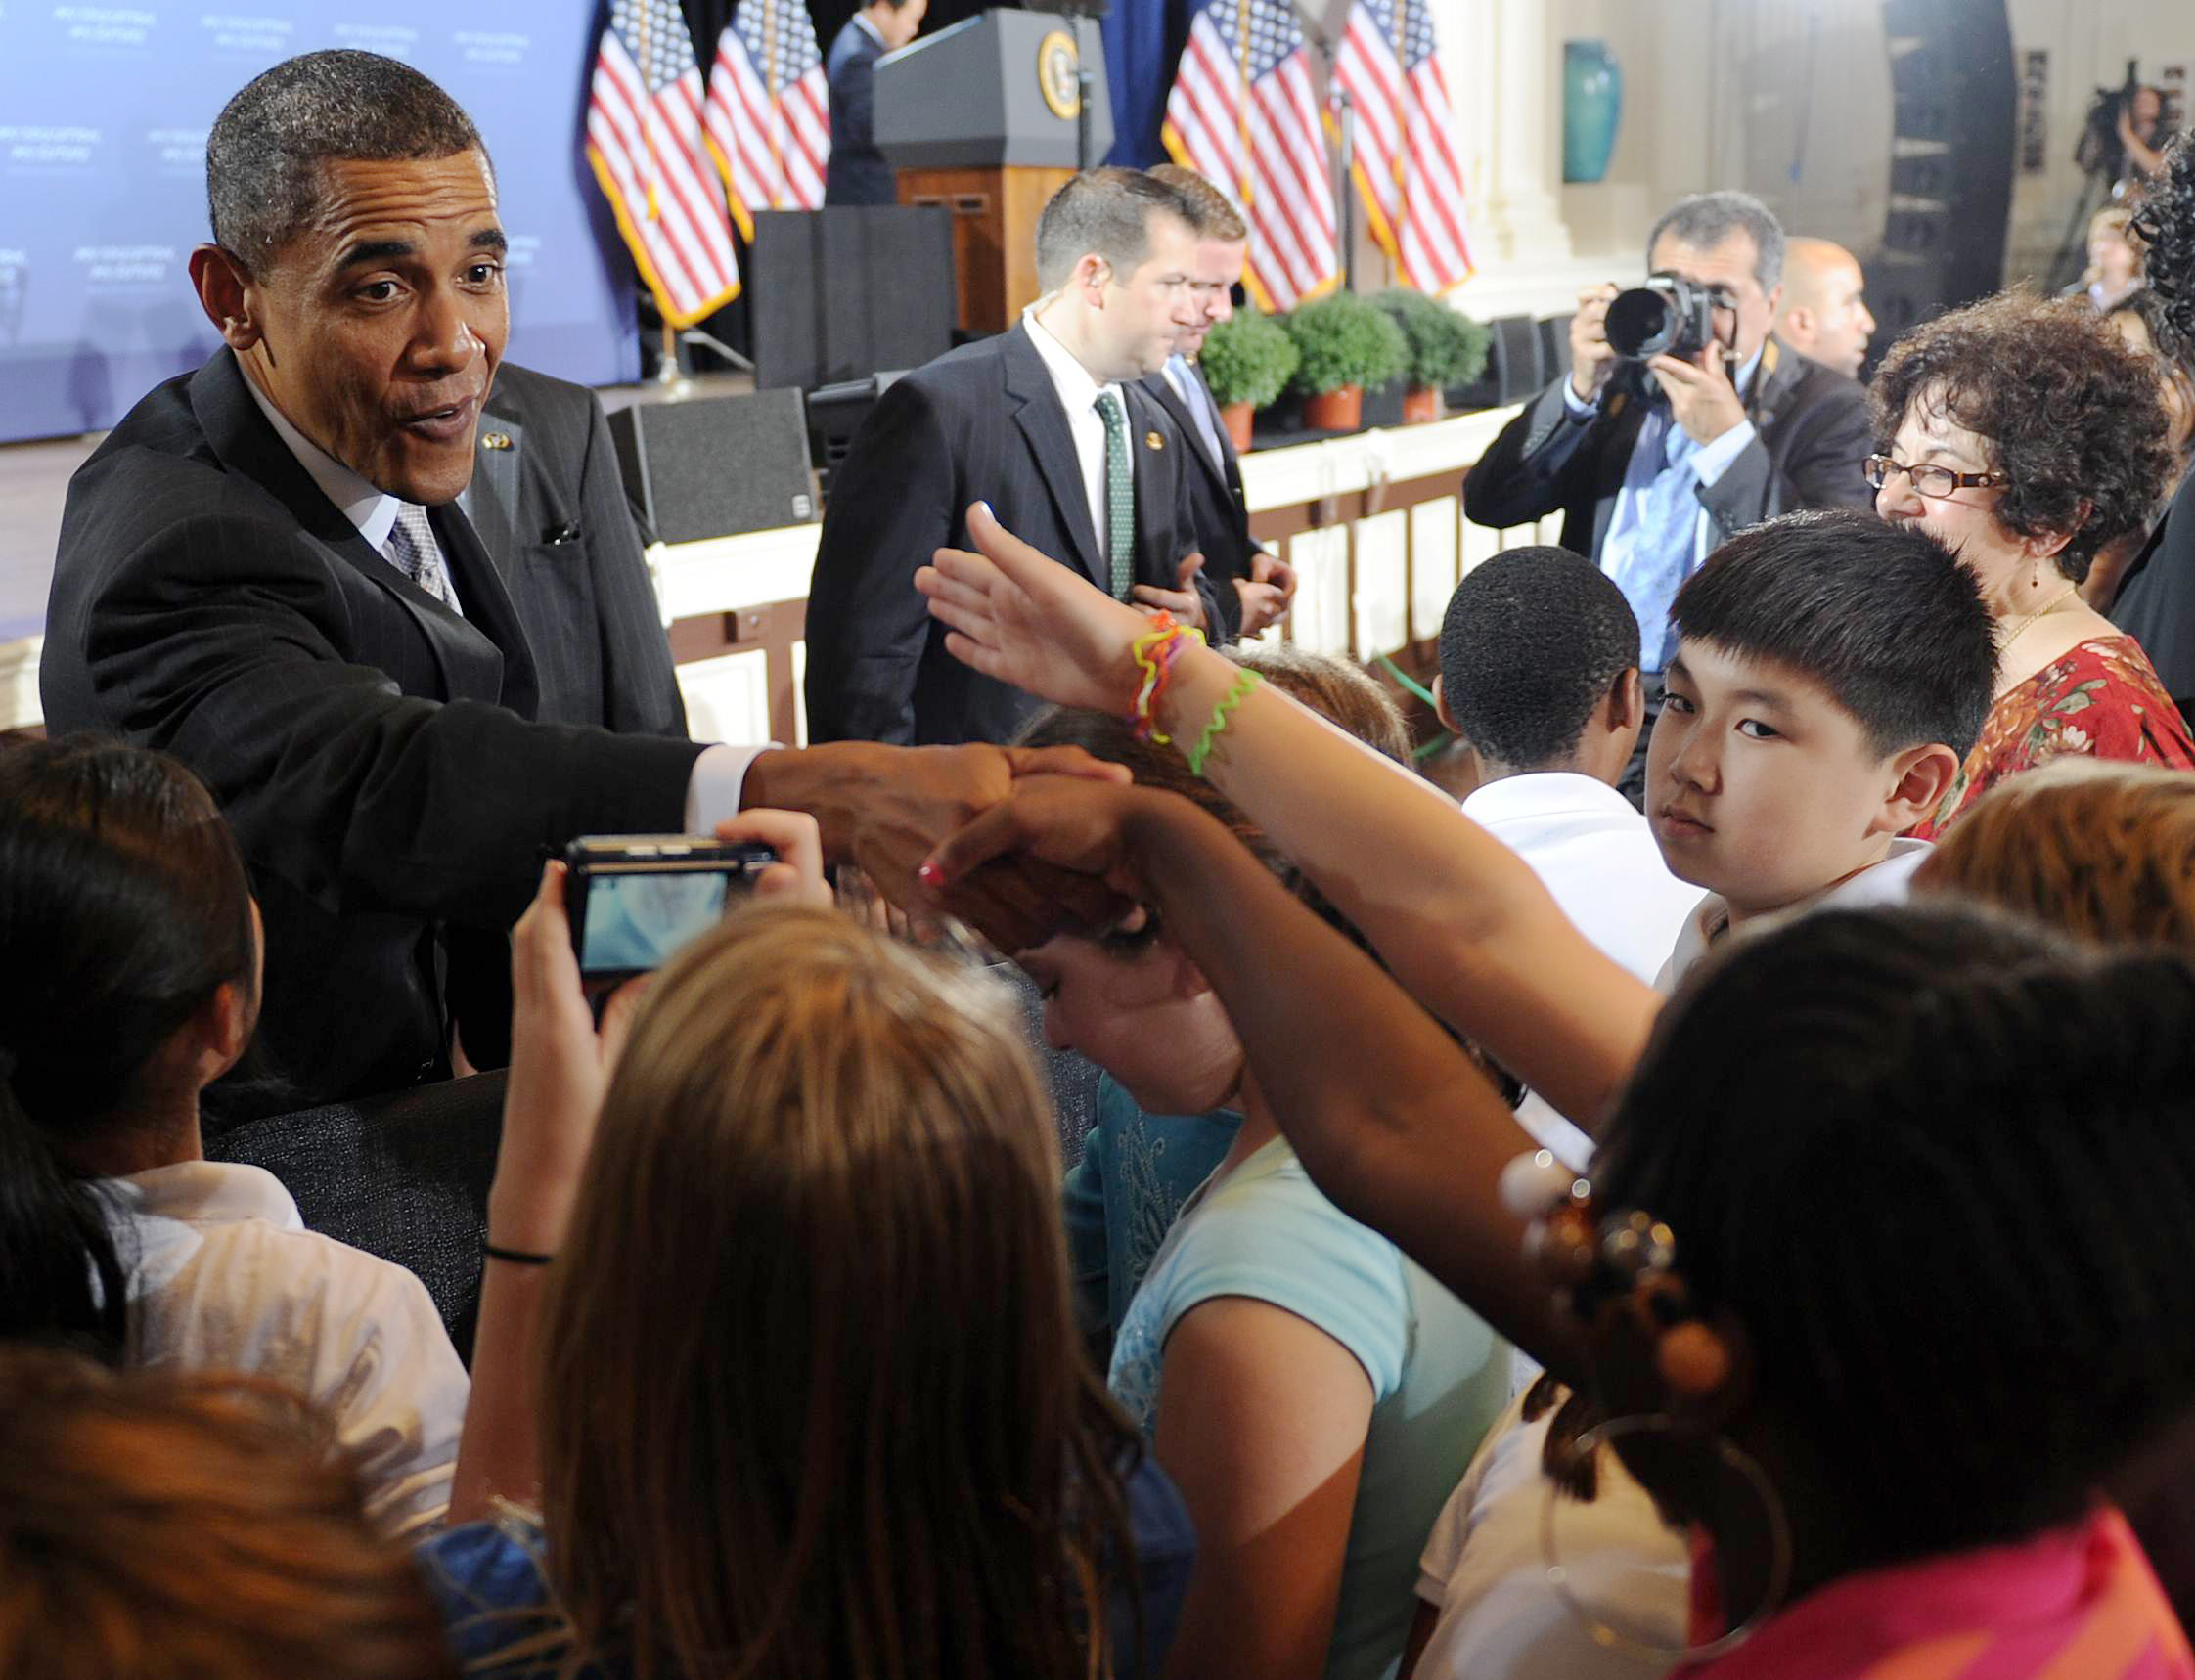 US President Barack Obama shakes hands with students after his second annual Back-to-School speech on September 14, 2010 at the Julia R. Masterman Laboratory and Demonstration School in Philadelphia, Pennsylvania. AFP PHOTO / TIM SLOAN (Photo credit should read TIM SLOAN/AFP via Getty Images)